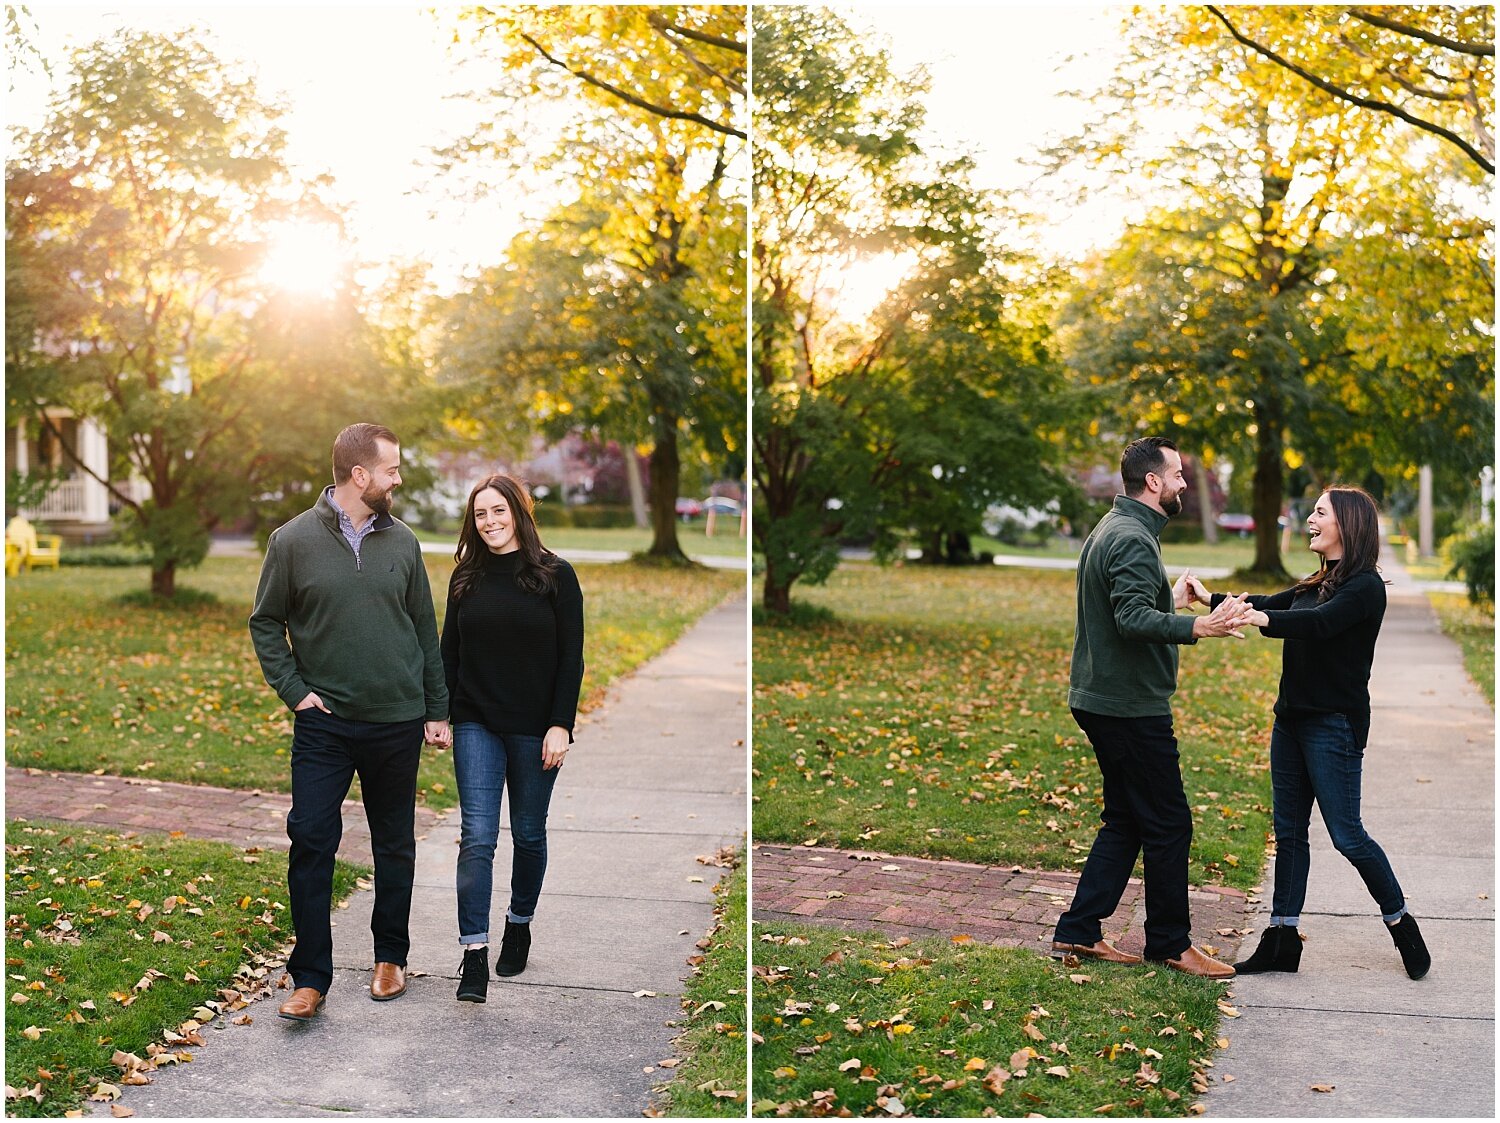 living+roots+wine+engagement+session+rochester+ny+wedding+photographer (22).jpg